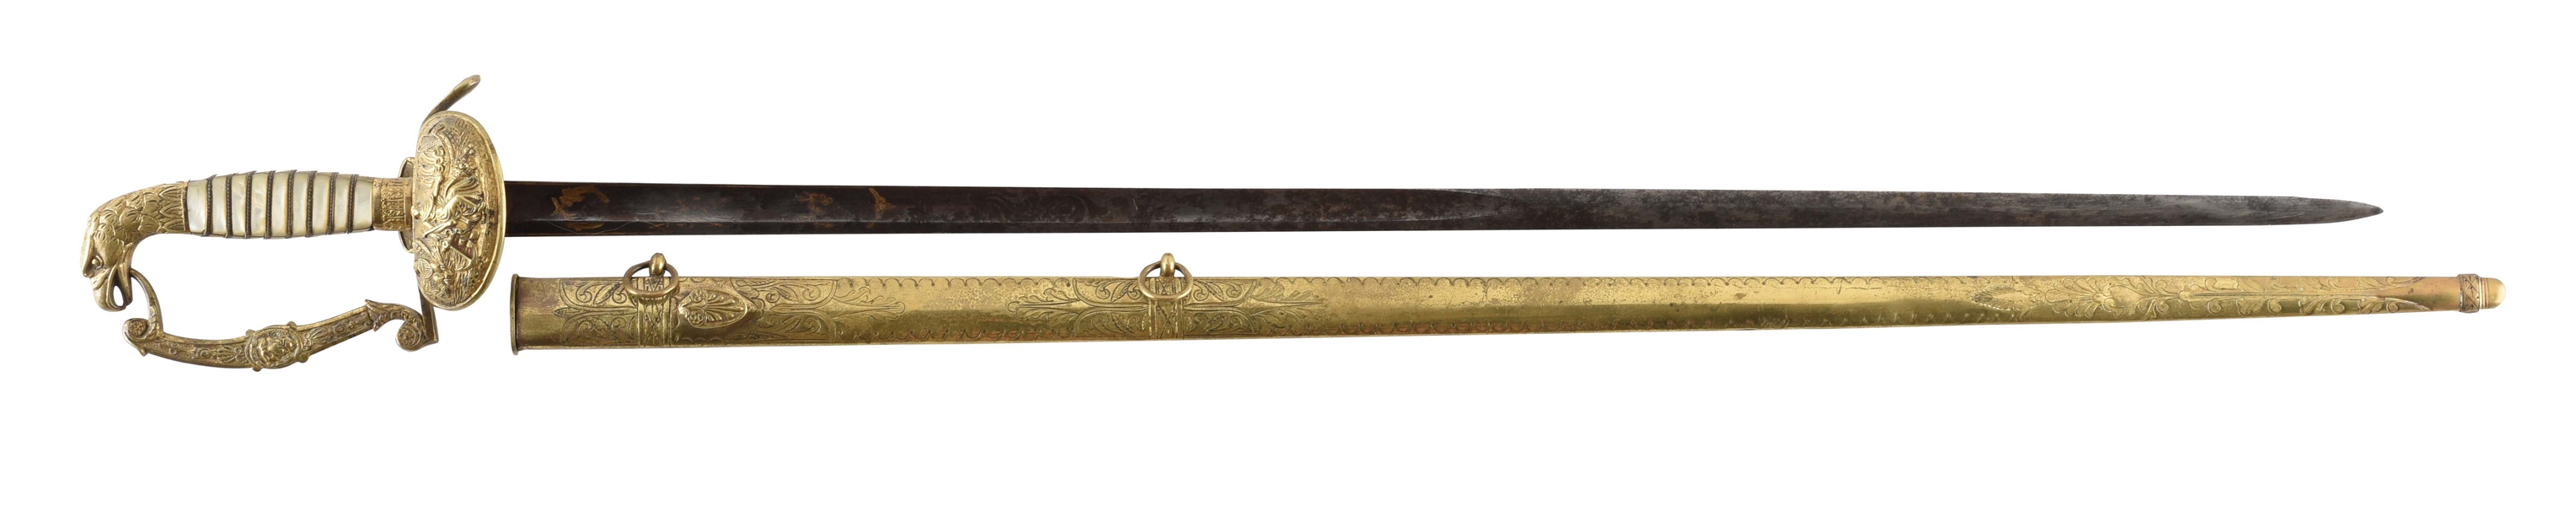 GILT BRASS EAGLE POMMEL NAVY OFFICERS SWORD WITH SCABBARD.